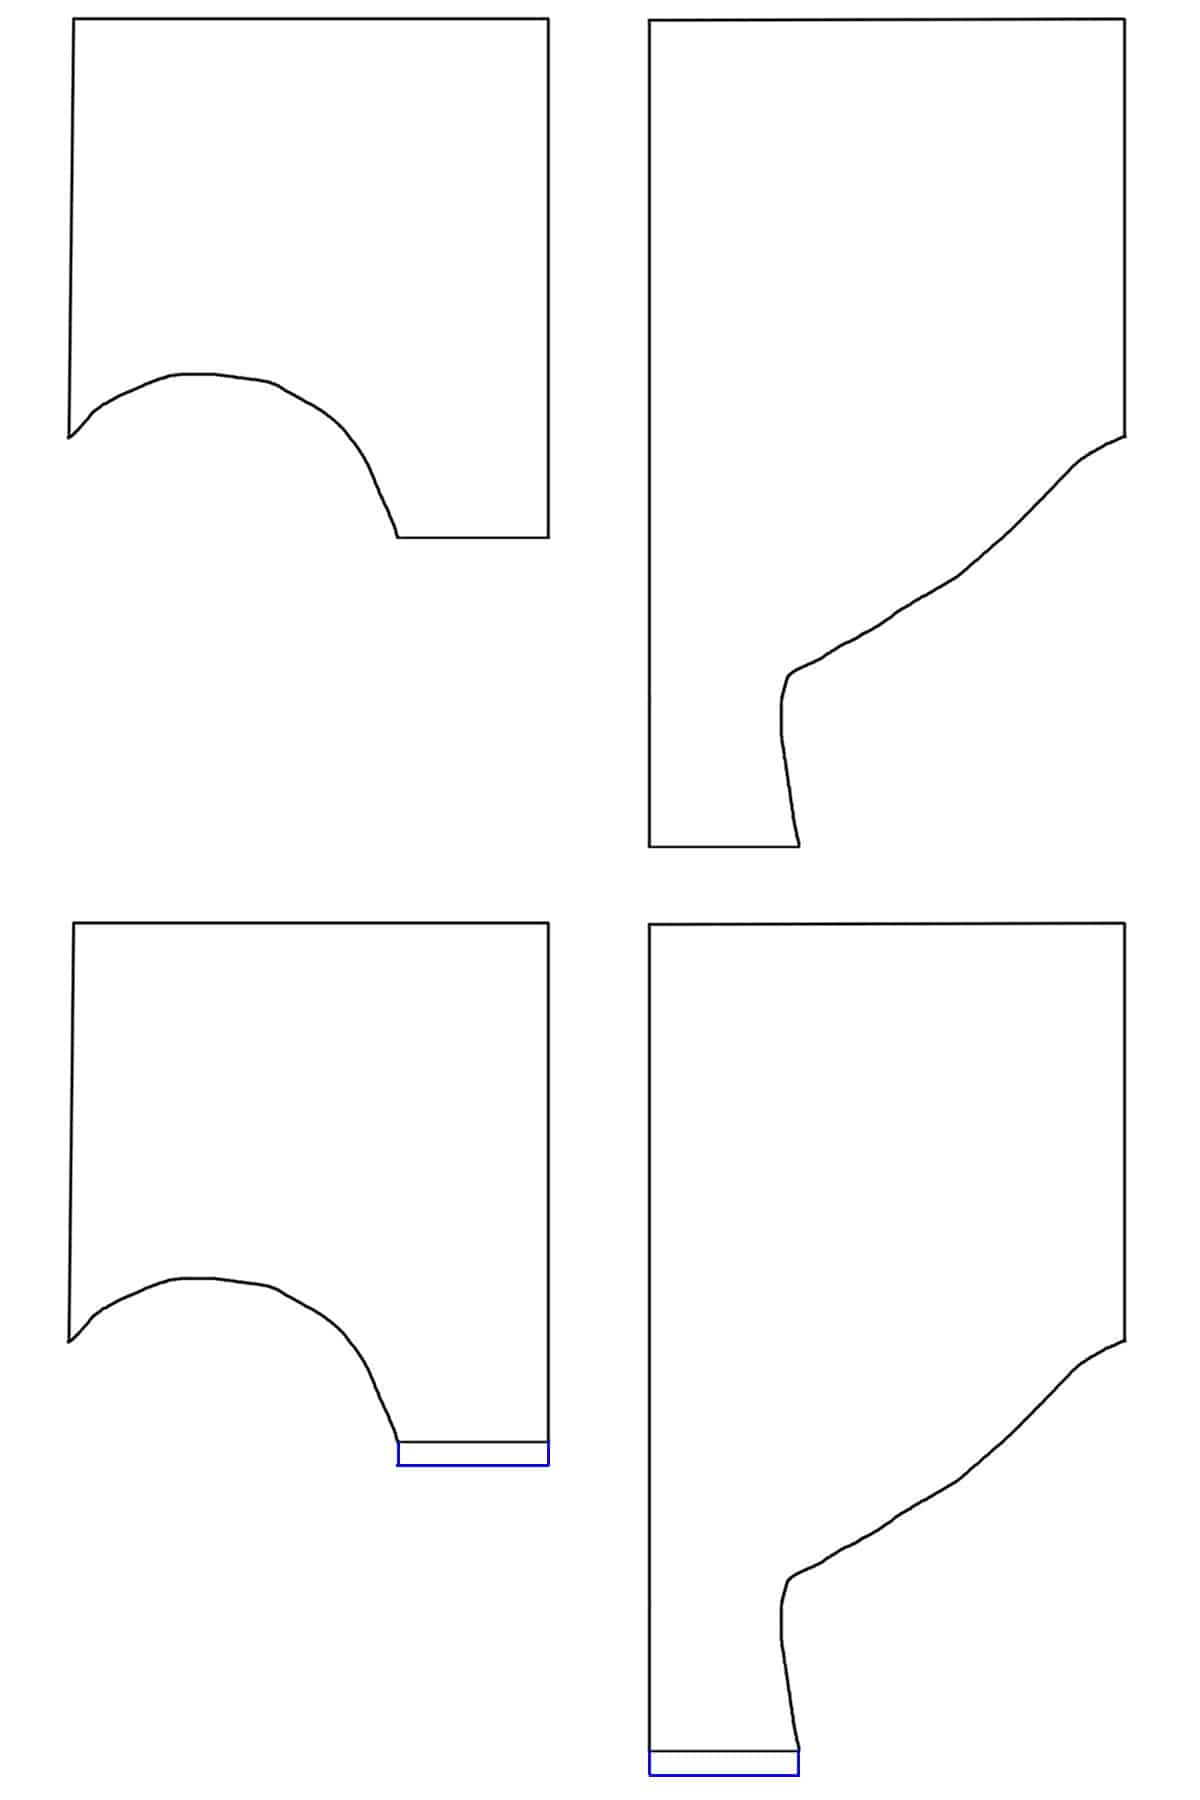 A 4 part diagram showing the additional length being added to the front and back trunks pattern, as described.